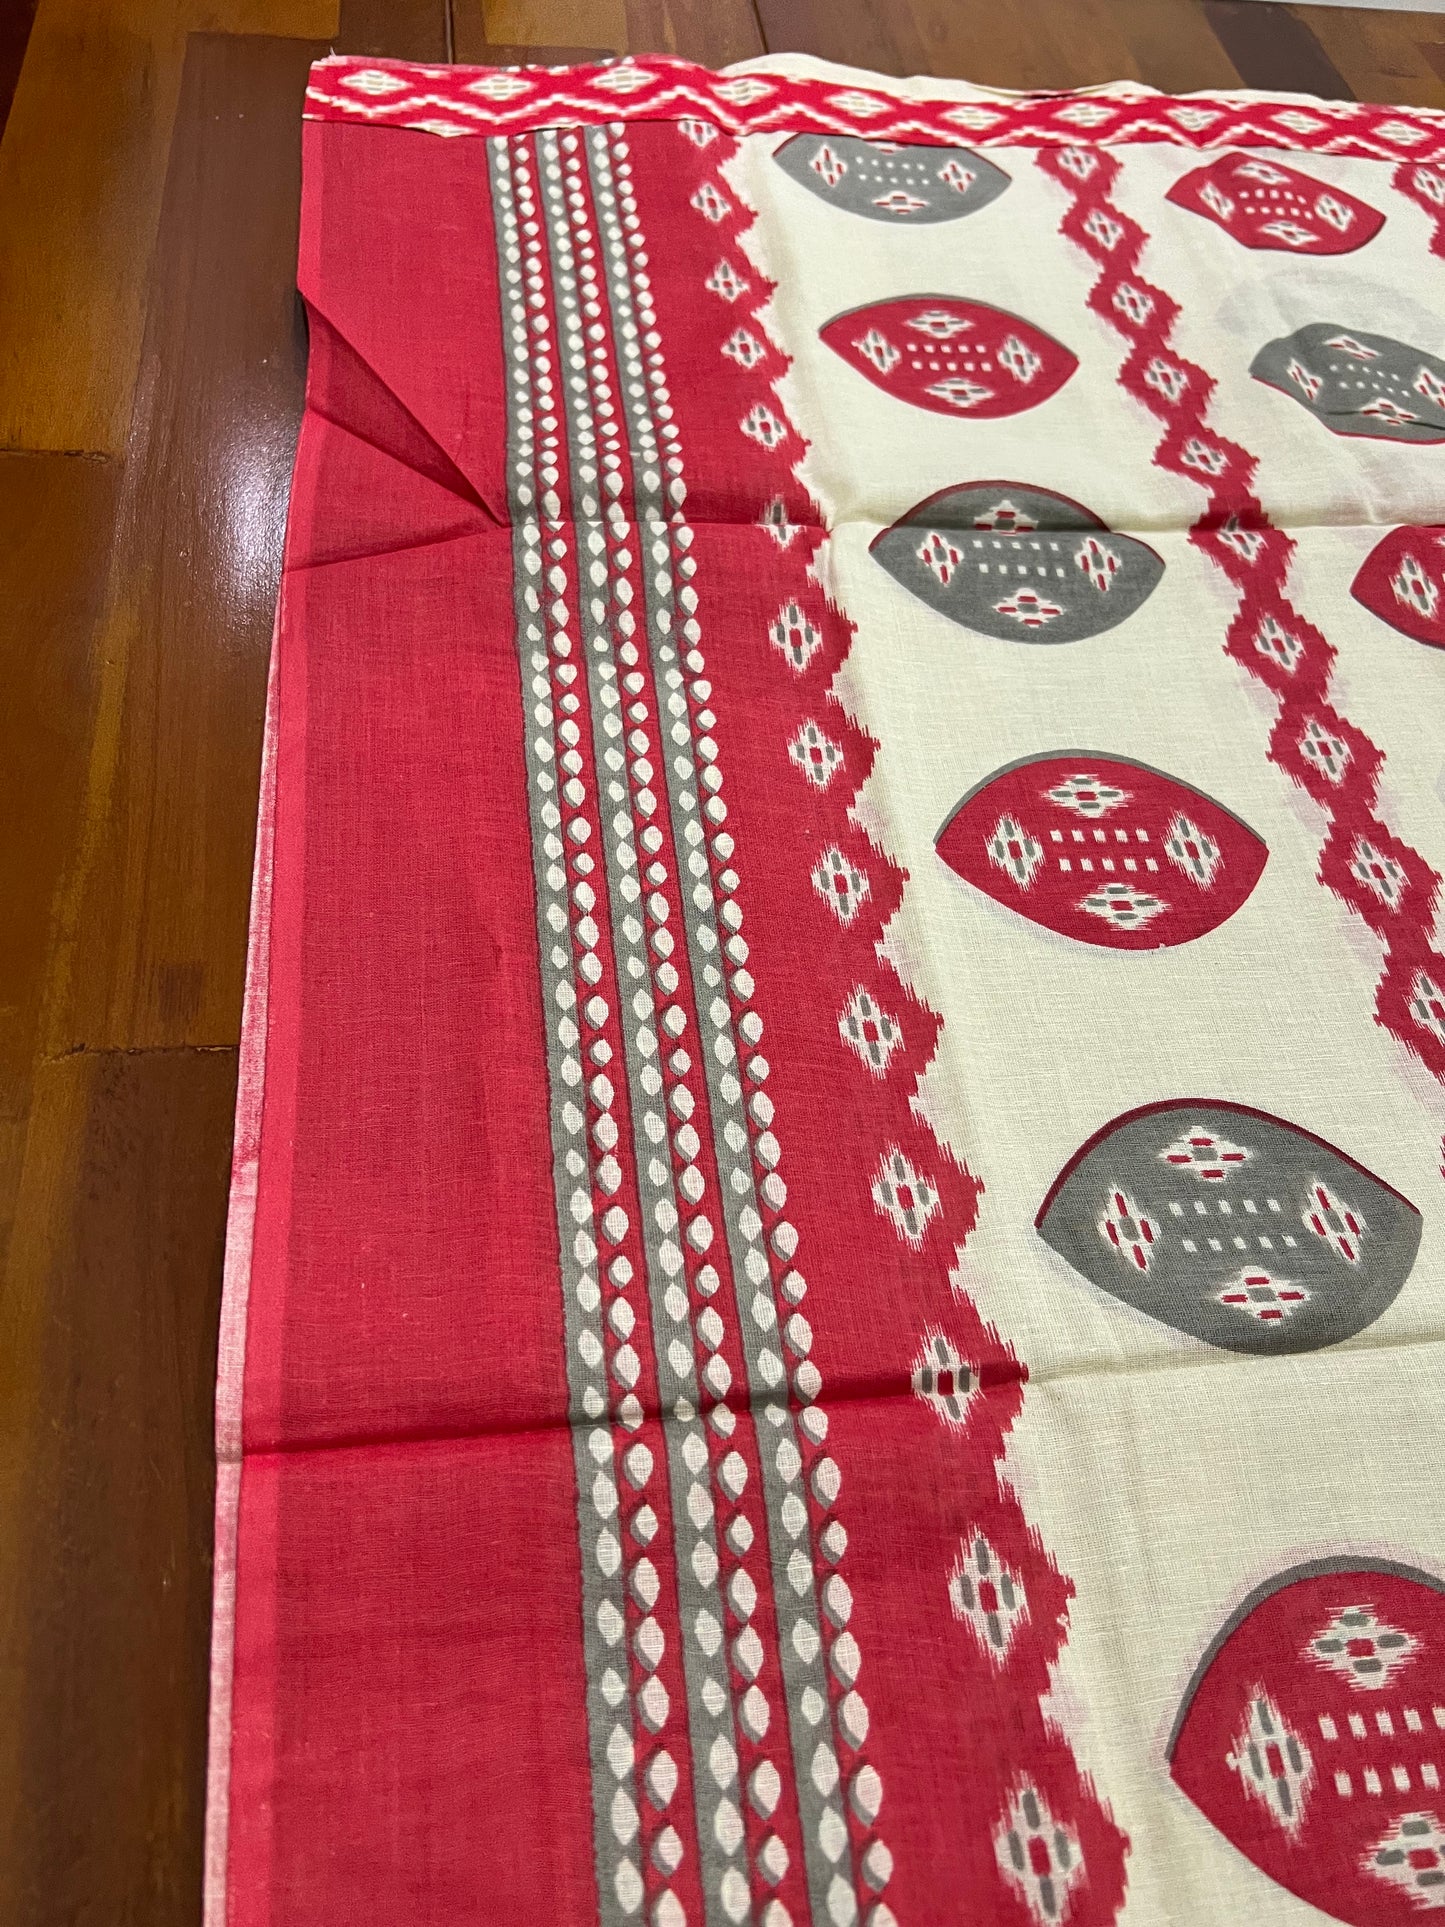 Southloom™ Cotton Churidar Salwar Suit Material in Red and White Zig Zag Prints